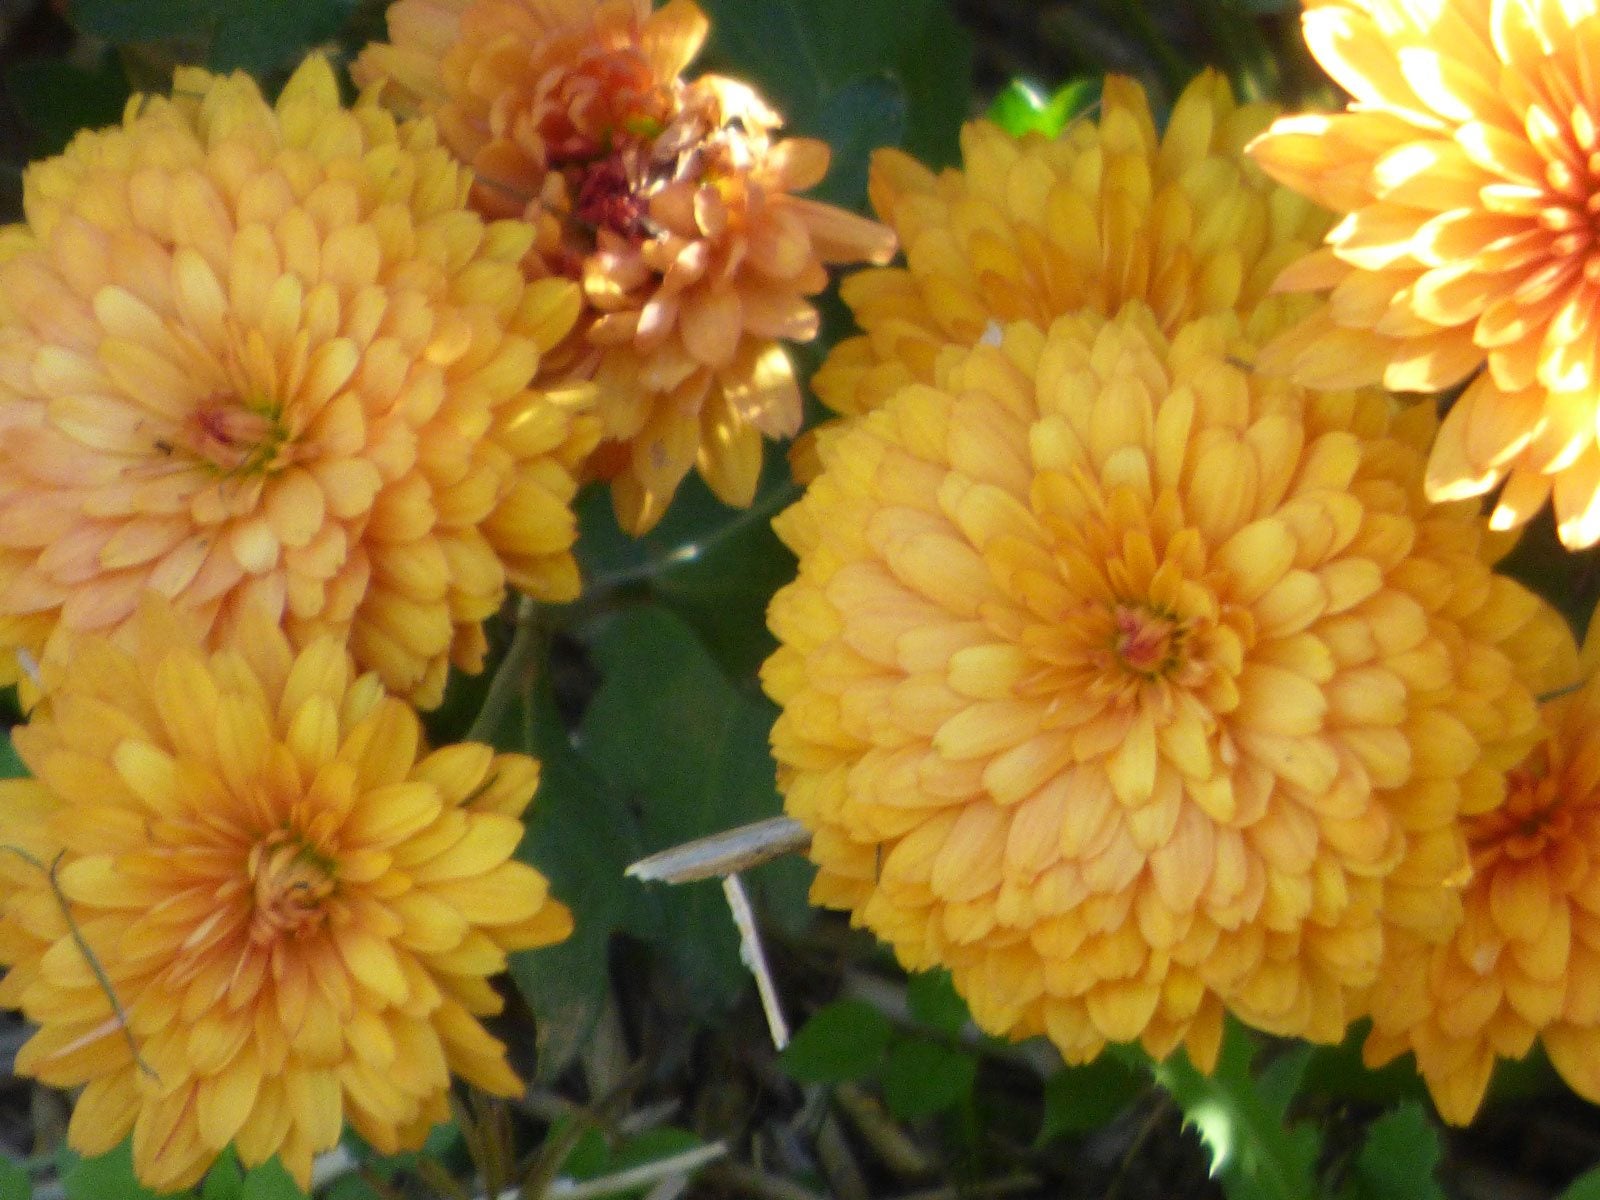 Fact About Chrysanthemum Flowers - Are Mums Annual Or Perennial Flowers